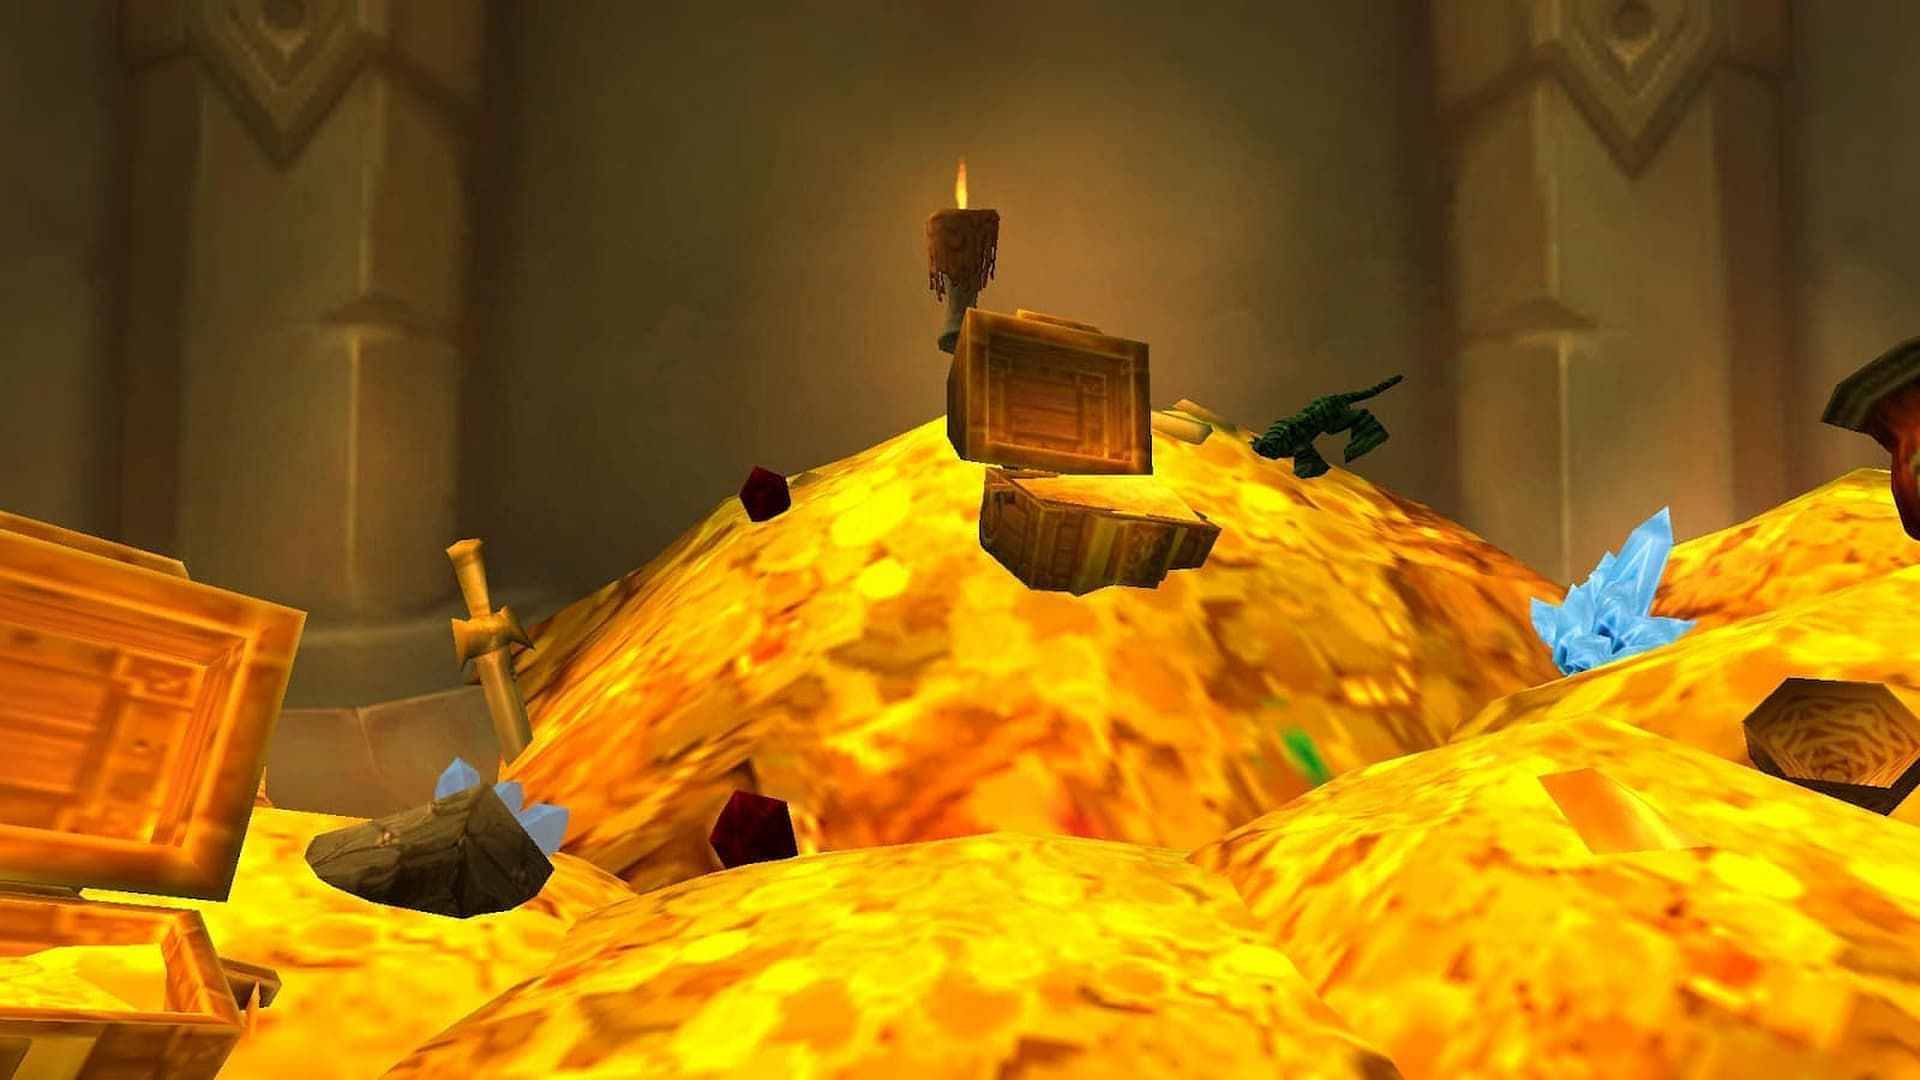 You need to spend gold wisely in World of Warcraft. (Image via Blizzard)